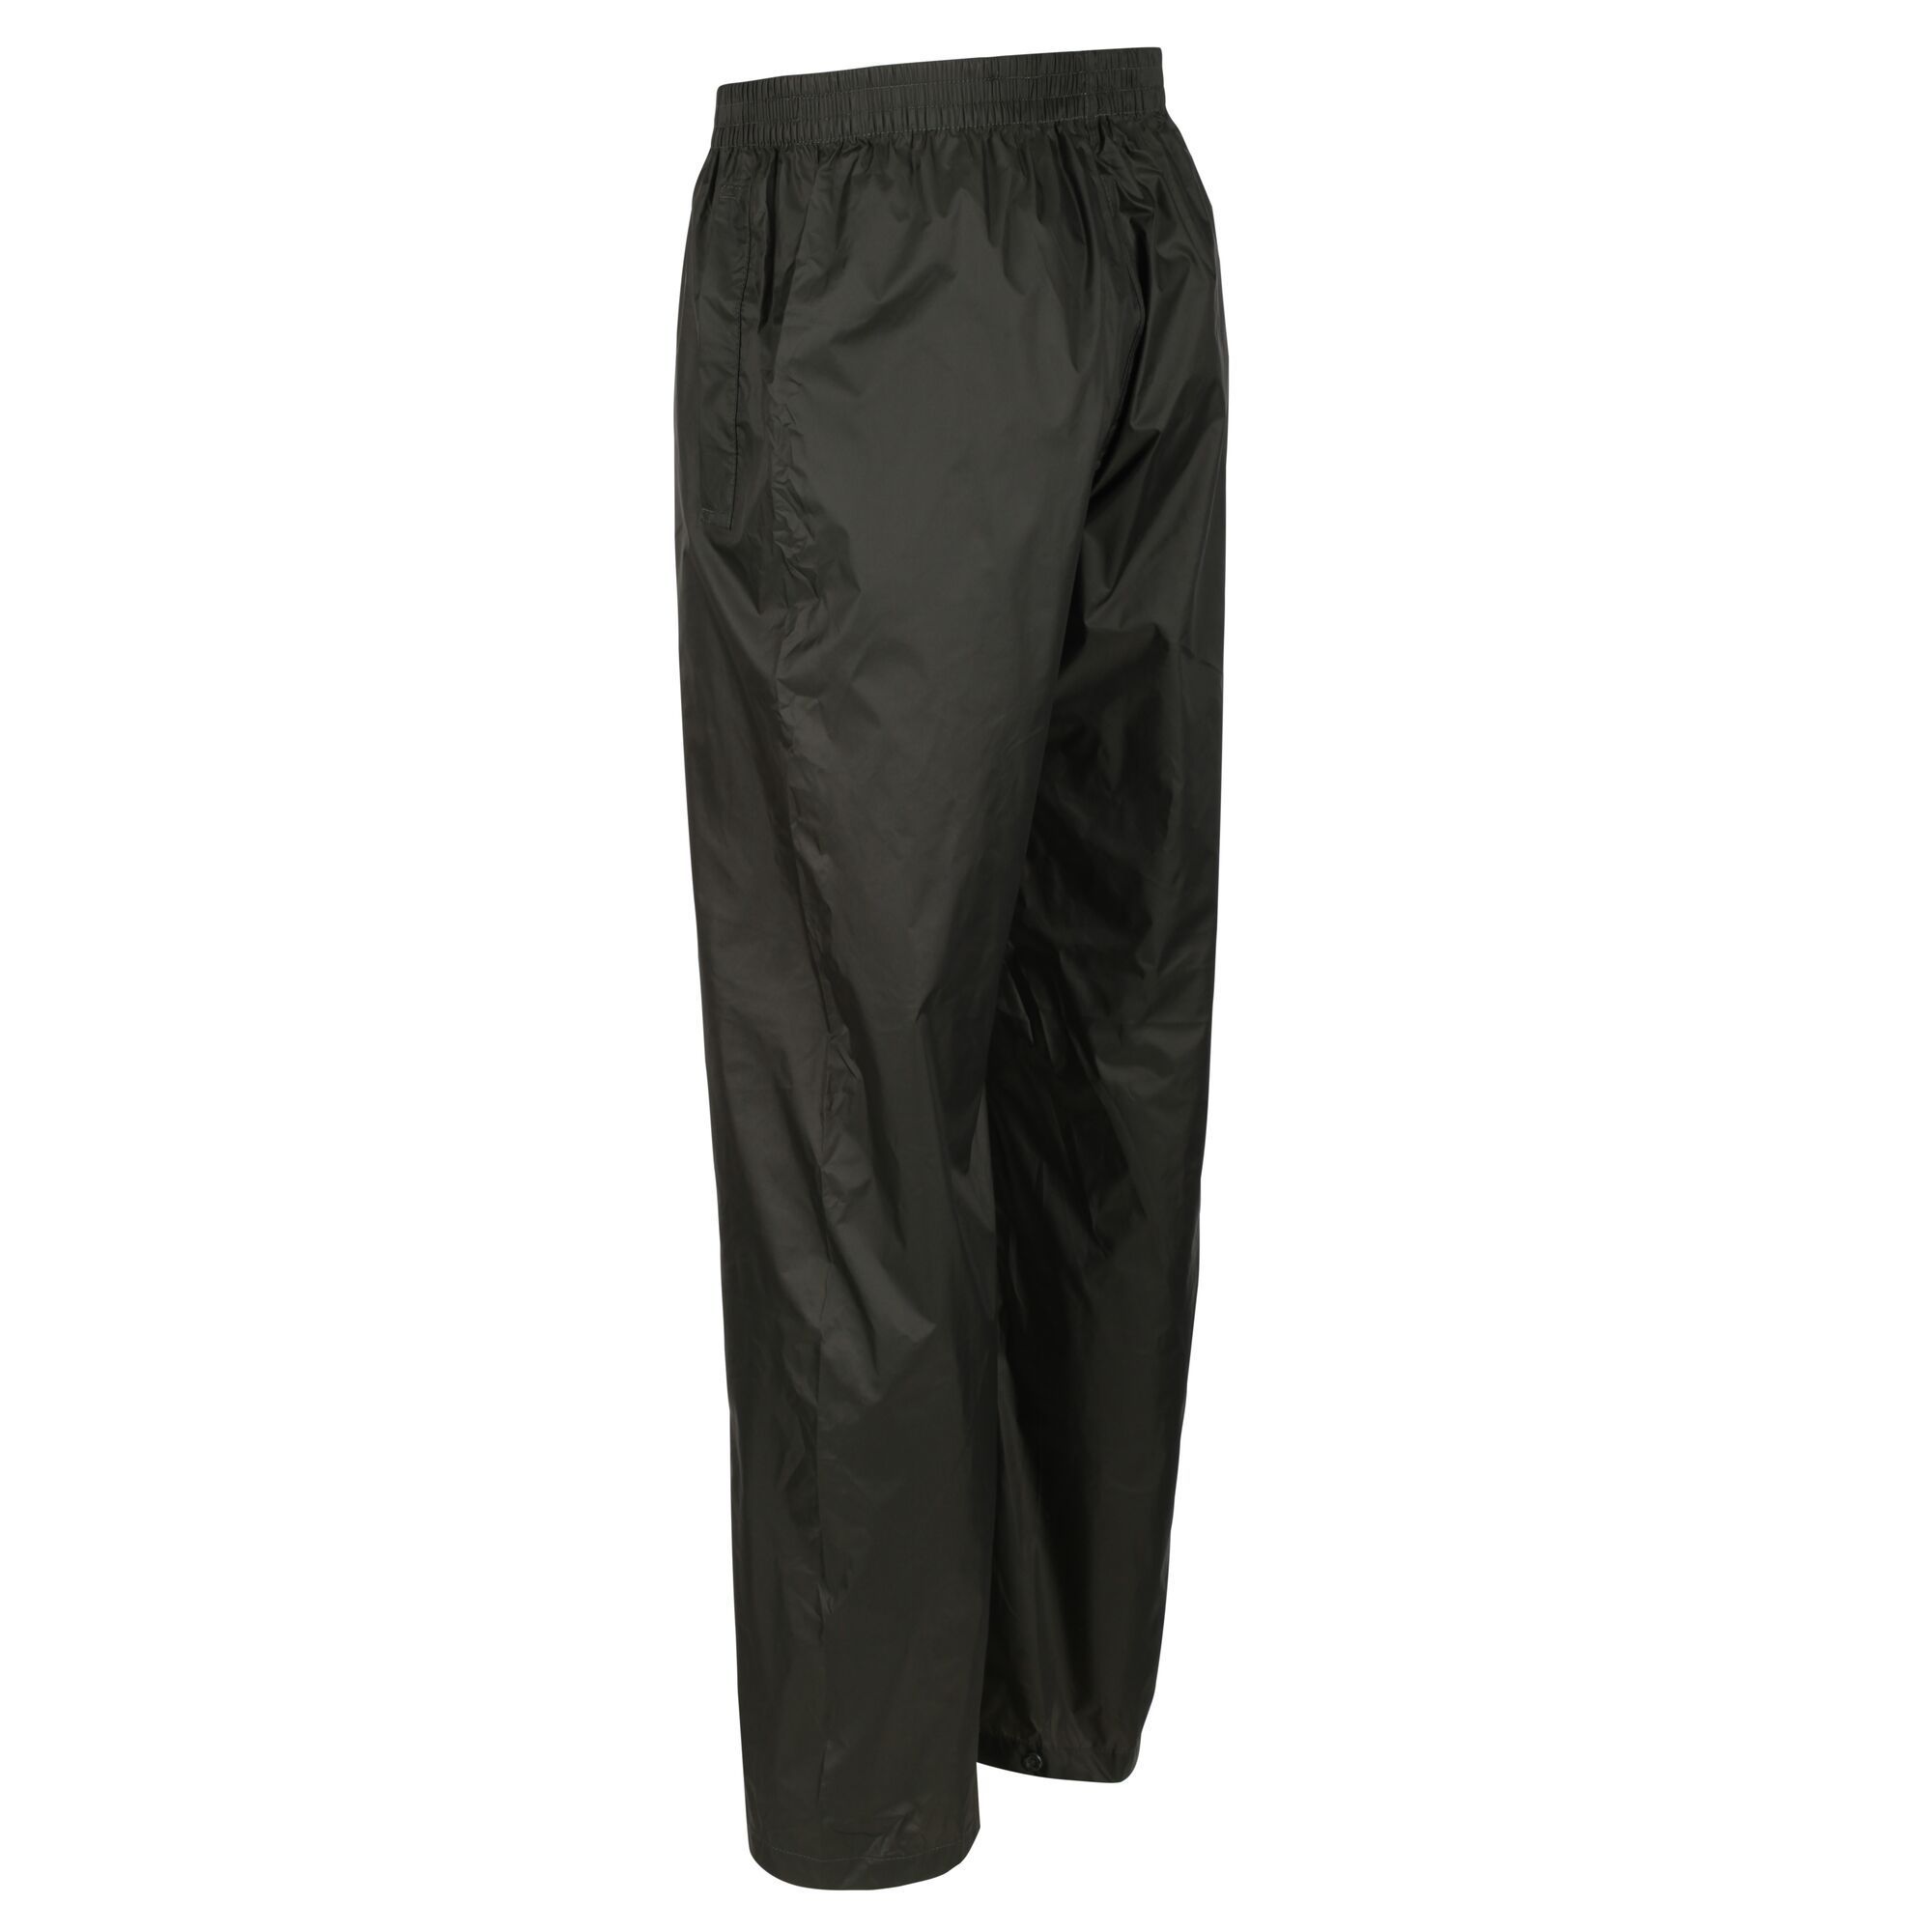 The mens Pack-it is an unlined packable overtrouser. Its your emergency wet-weather trouser built on over 30 years experience in outdoors clothing. Made from Isolite fabric technology to provide lightweight, waterproof, breathable and wind-resistant protection. Keep them in the handy stuff sack and stow them in daypacks, backpacks, car boots, desk drawers, kitchen cupboards, wherever suits. 100% Polyester. Regatta Mens Overtrousers Sizing (Waist Approx): XXS (26-28in/66-71cm), XS (28-30in/71-76cm), S (30-32in/76-81cm), M (33-34in/84-86cm), L (36-37in/92-94cm), XL (38-40in/97-102cm), XXL (42-44in/107-112cm), XXXL (46-48in/117-122cm), XXXXL (50-52in/127-132cm).